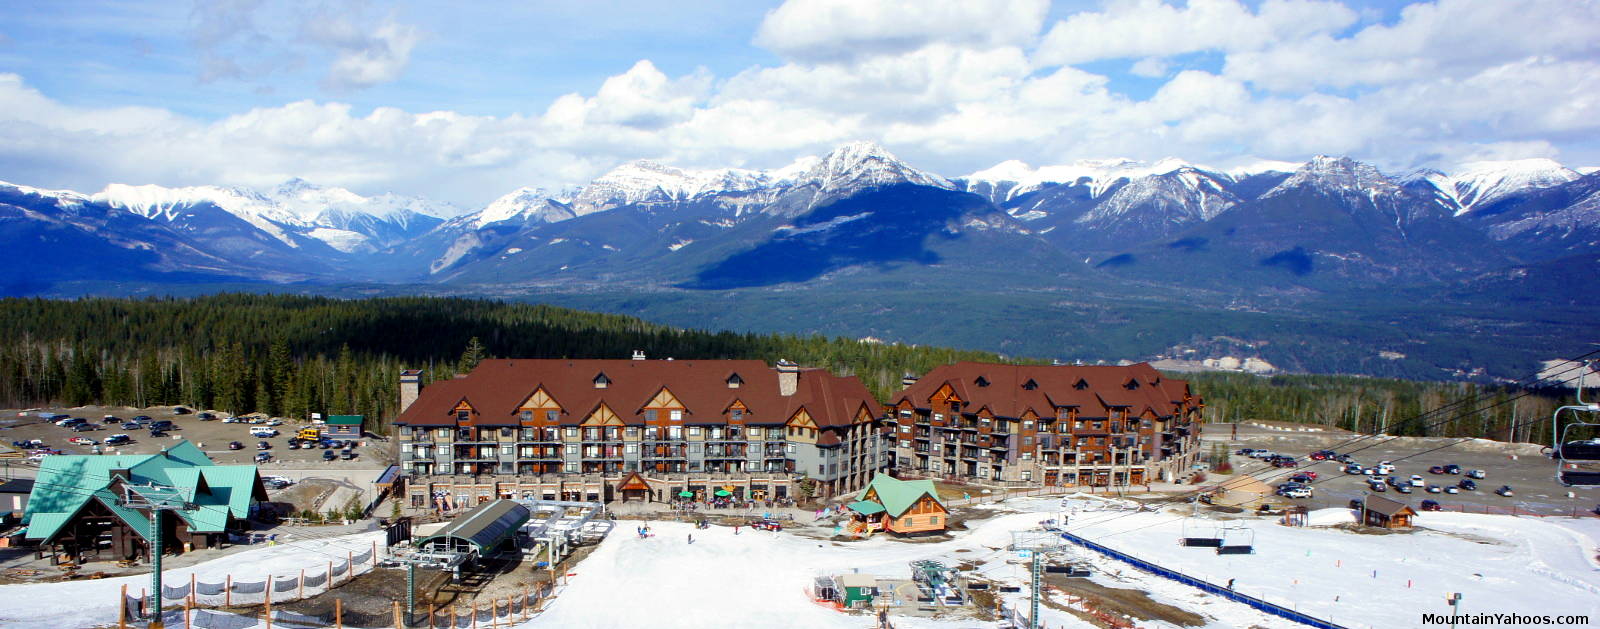 View of the base of Kicking Horse